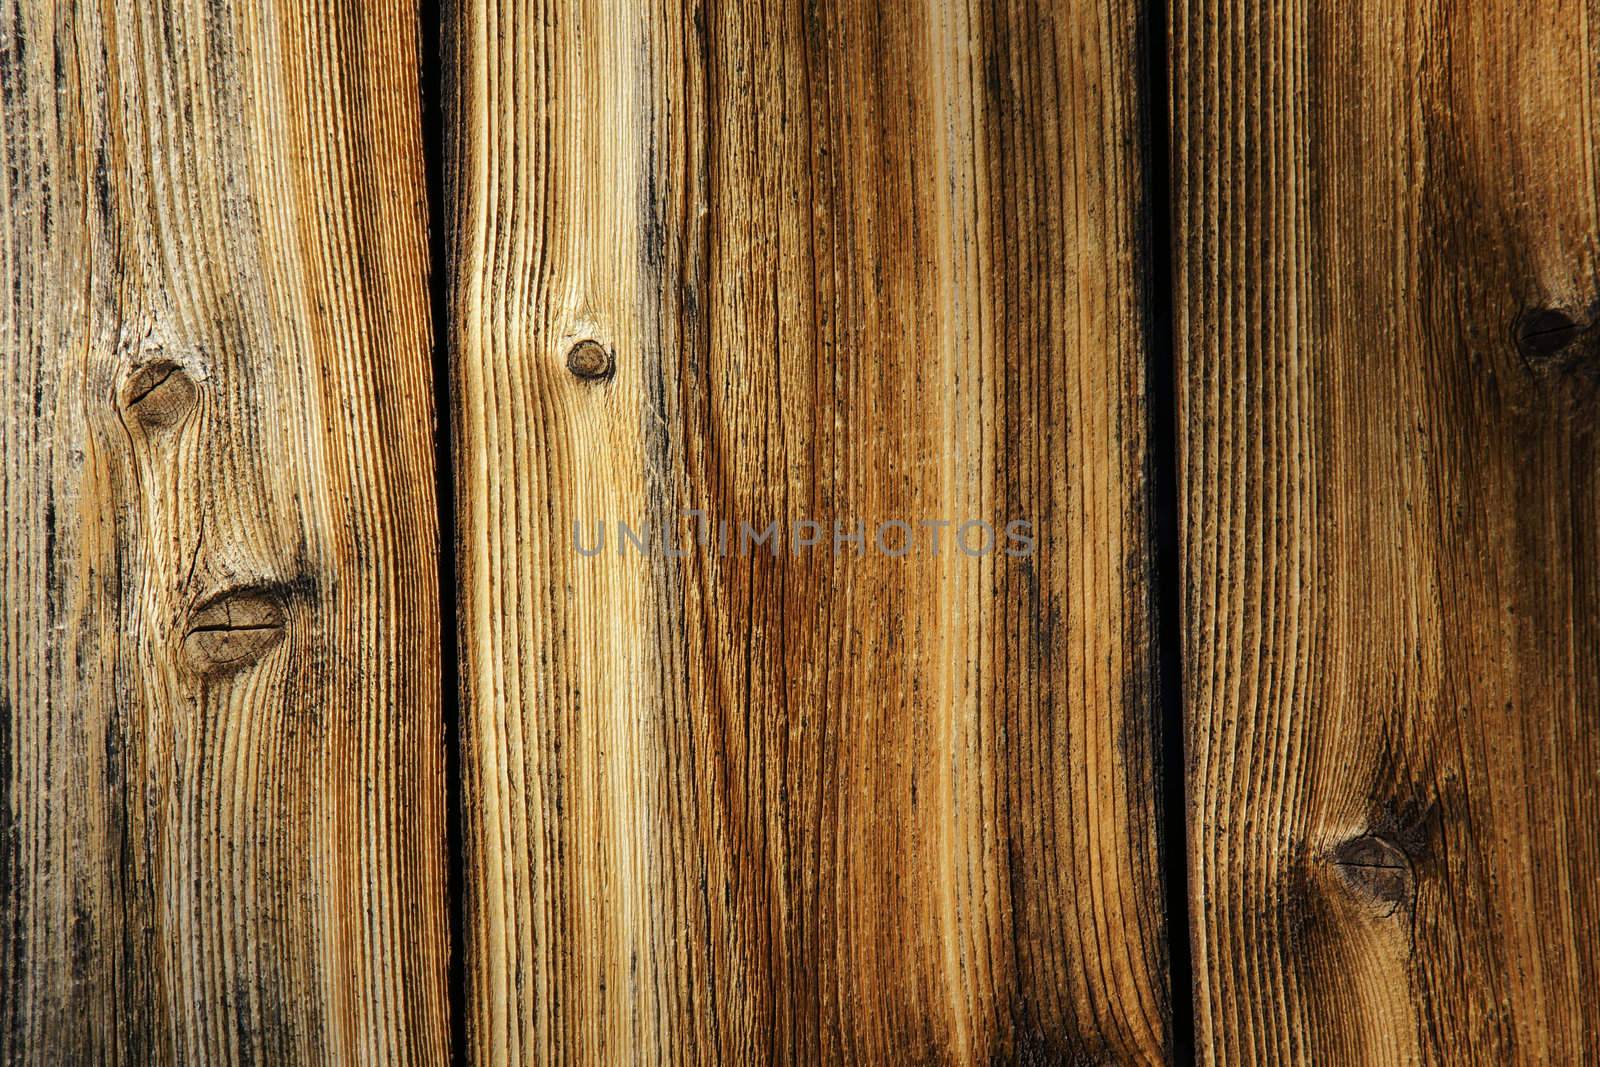 Weathered wood plank of an old cabin, great background and texture.